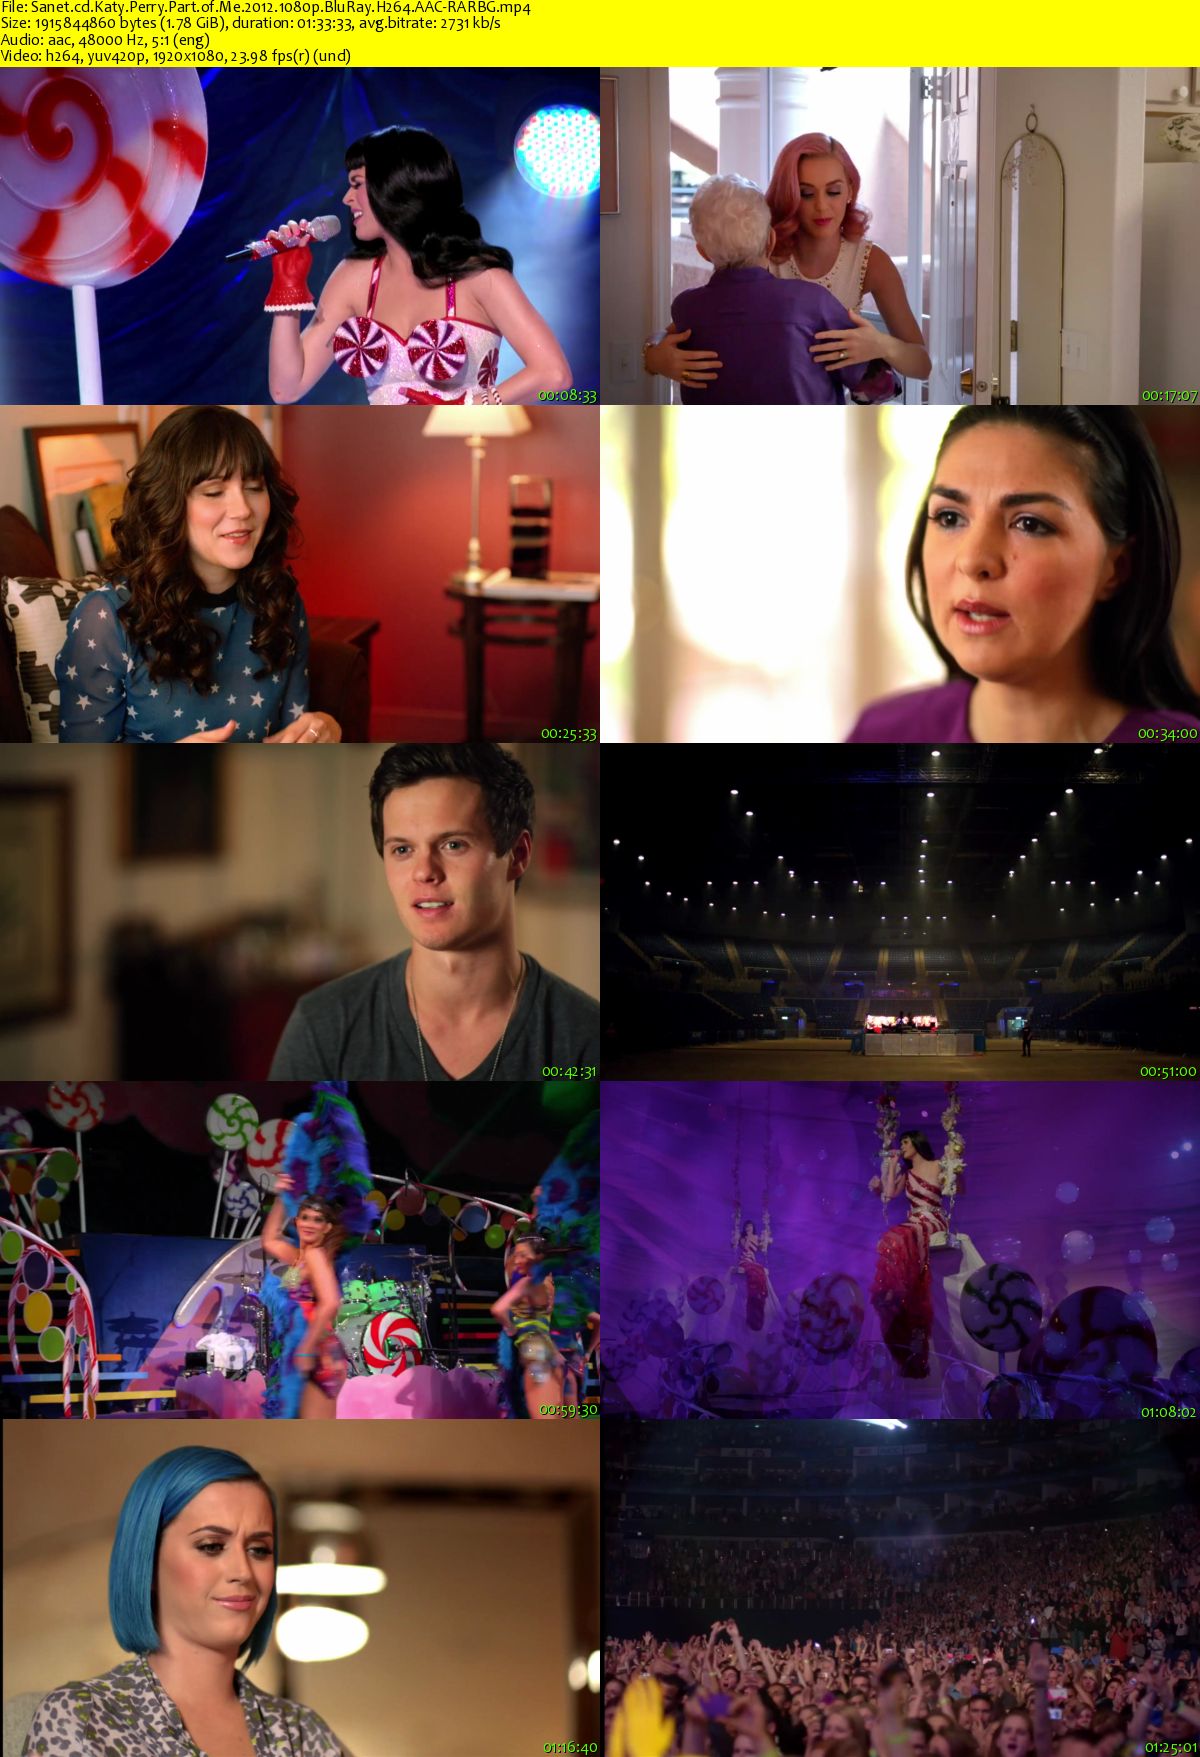 Katy Perry: Part of Me 2012 720p 1080p Bluray Free